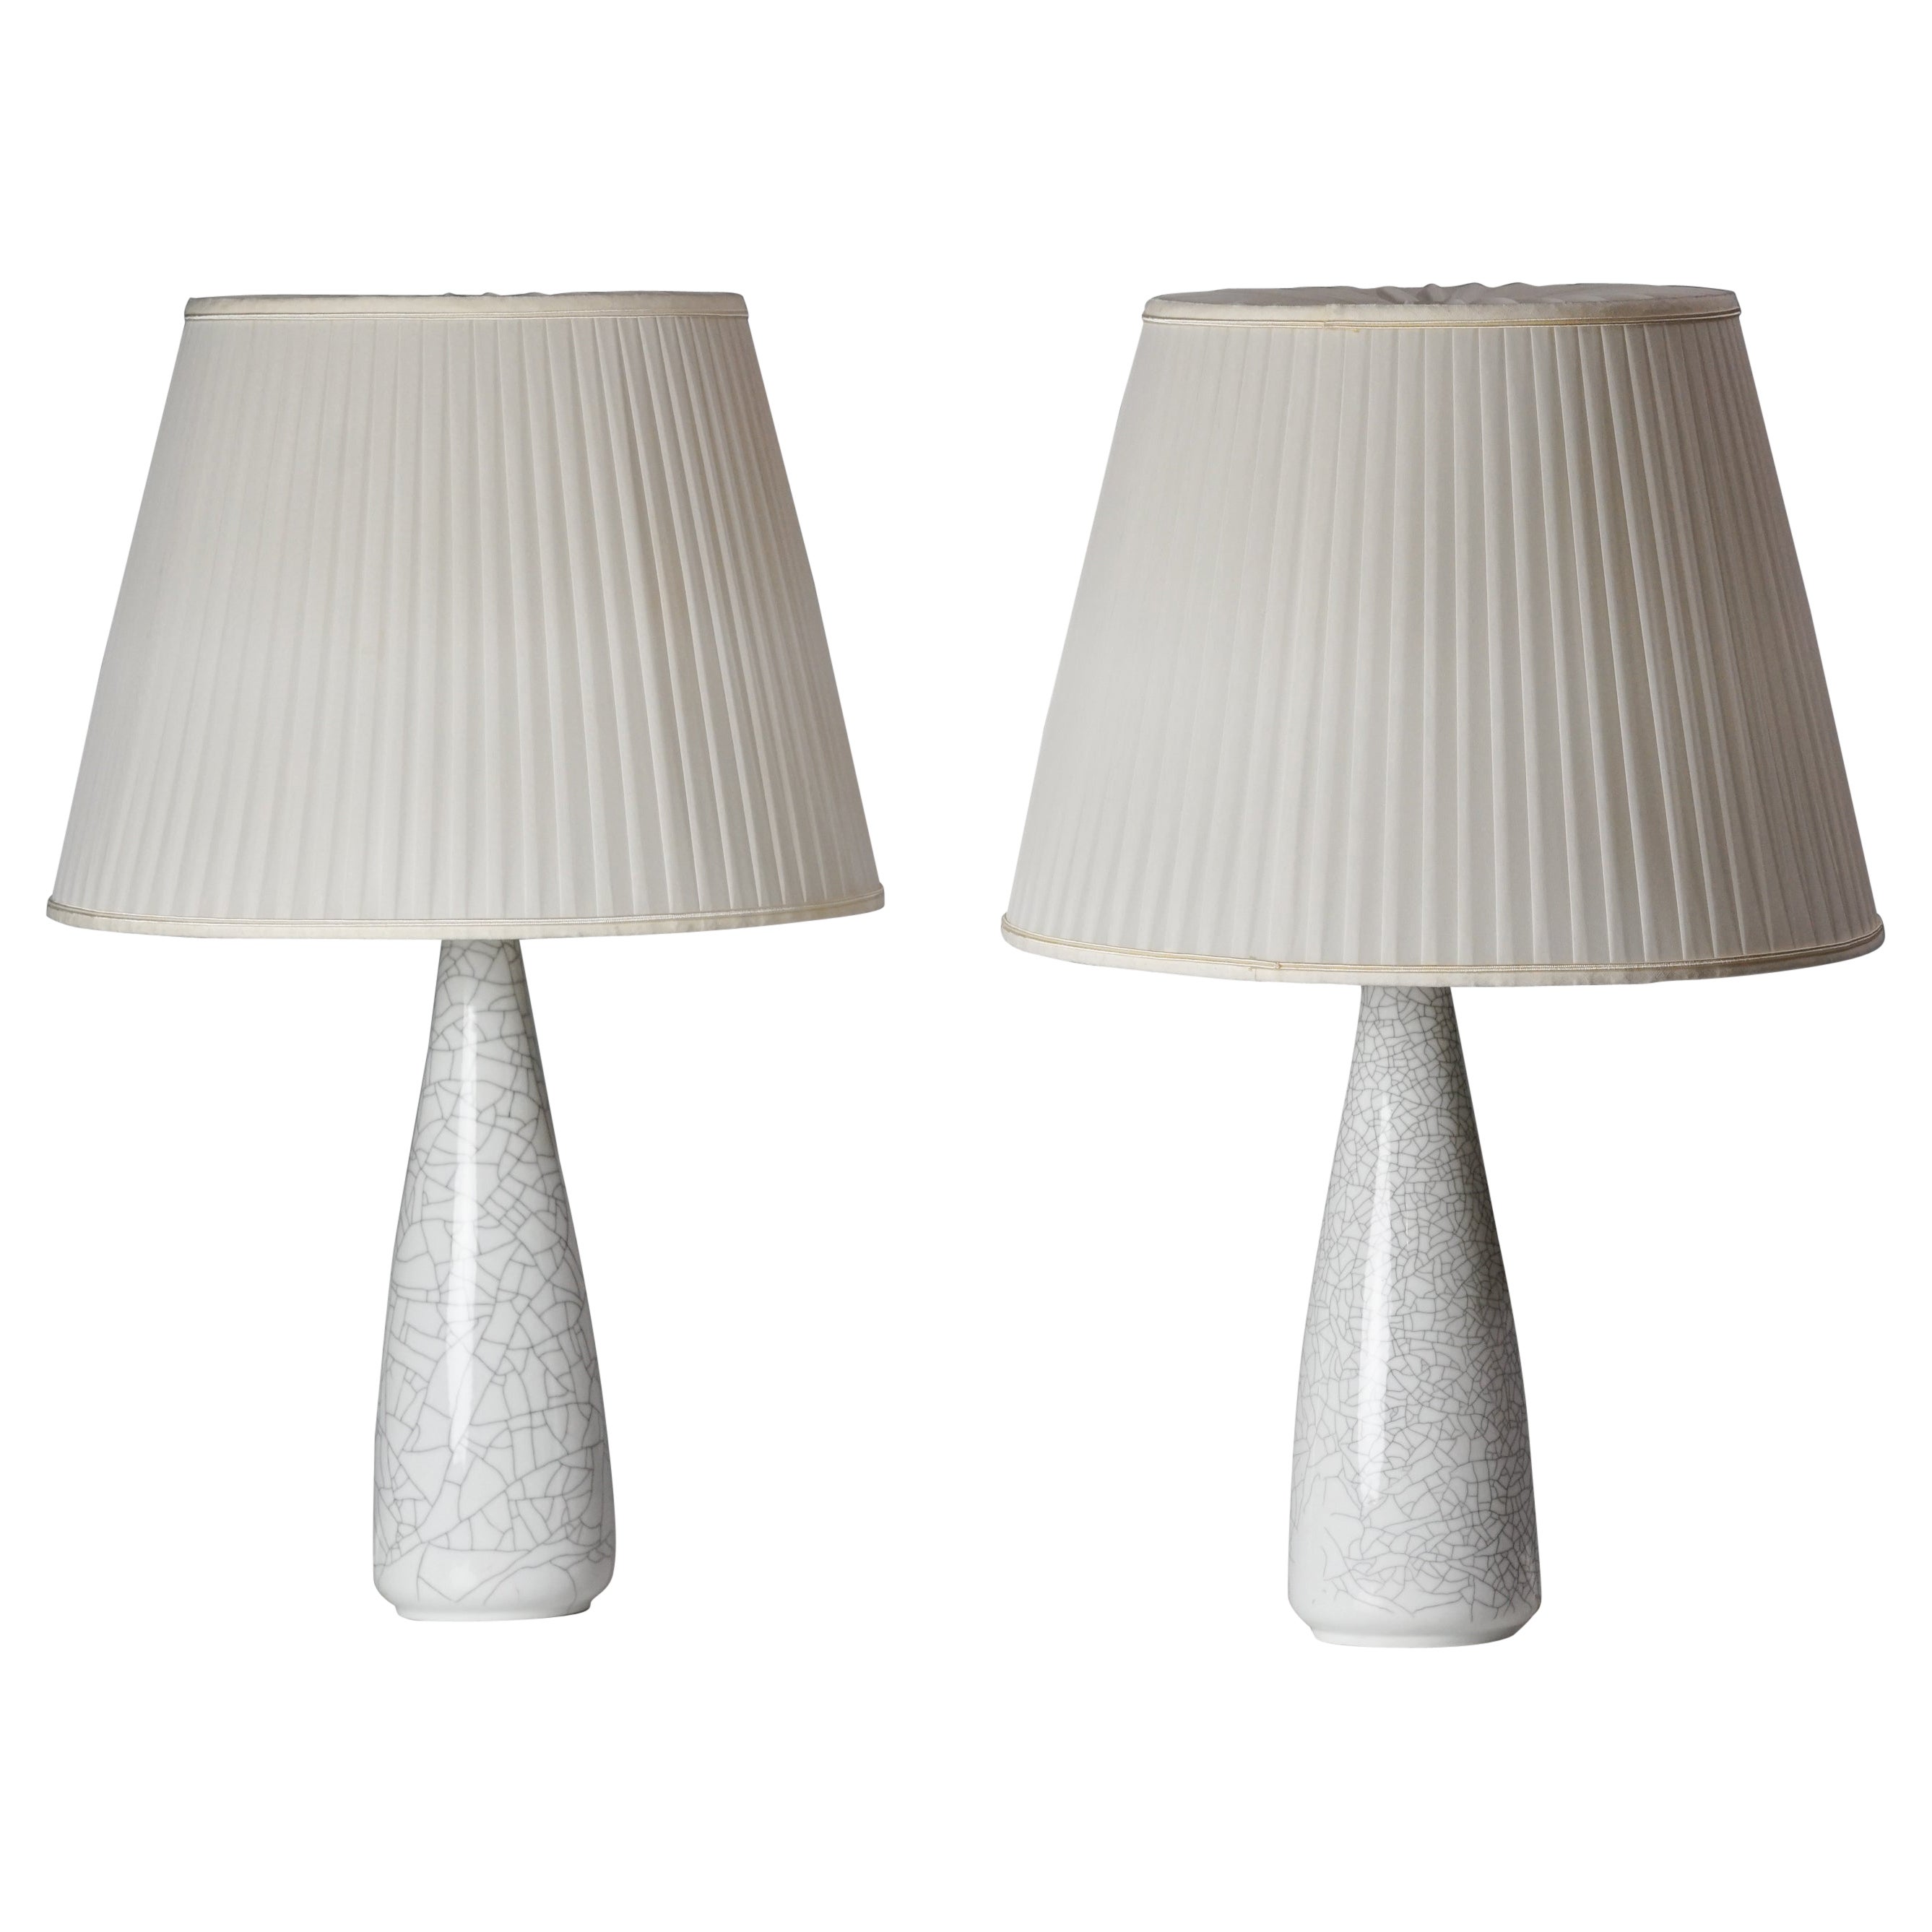 Pair of Enameled Ceramic Table Lamps by Toini Muona for Arabia, 1940s 